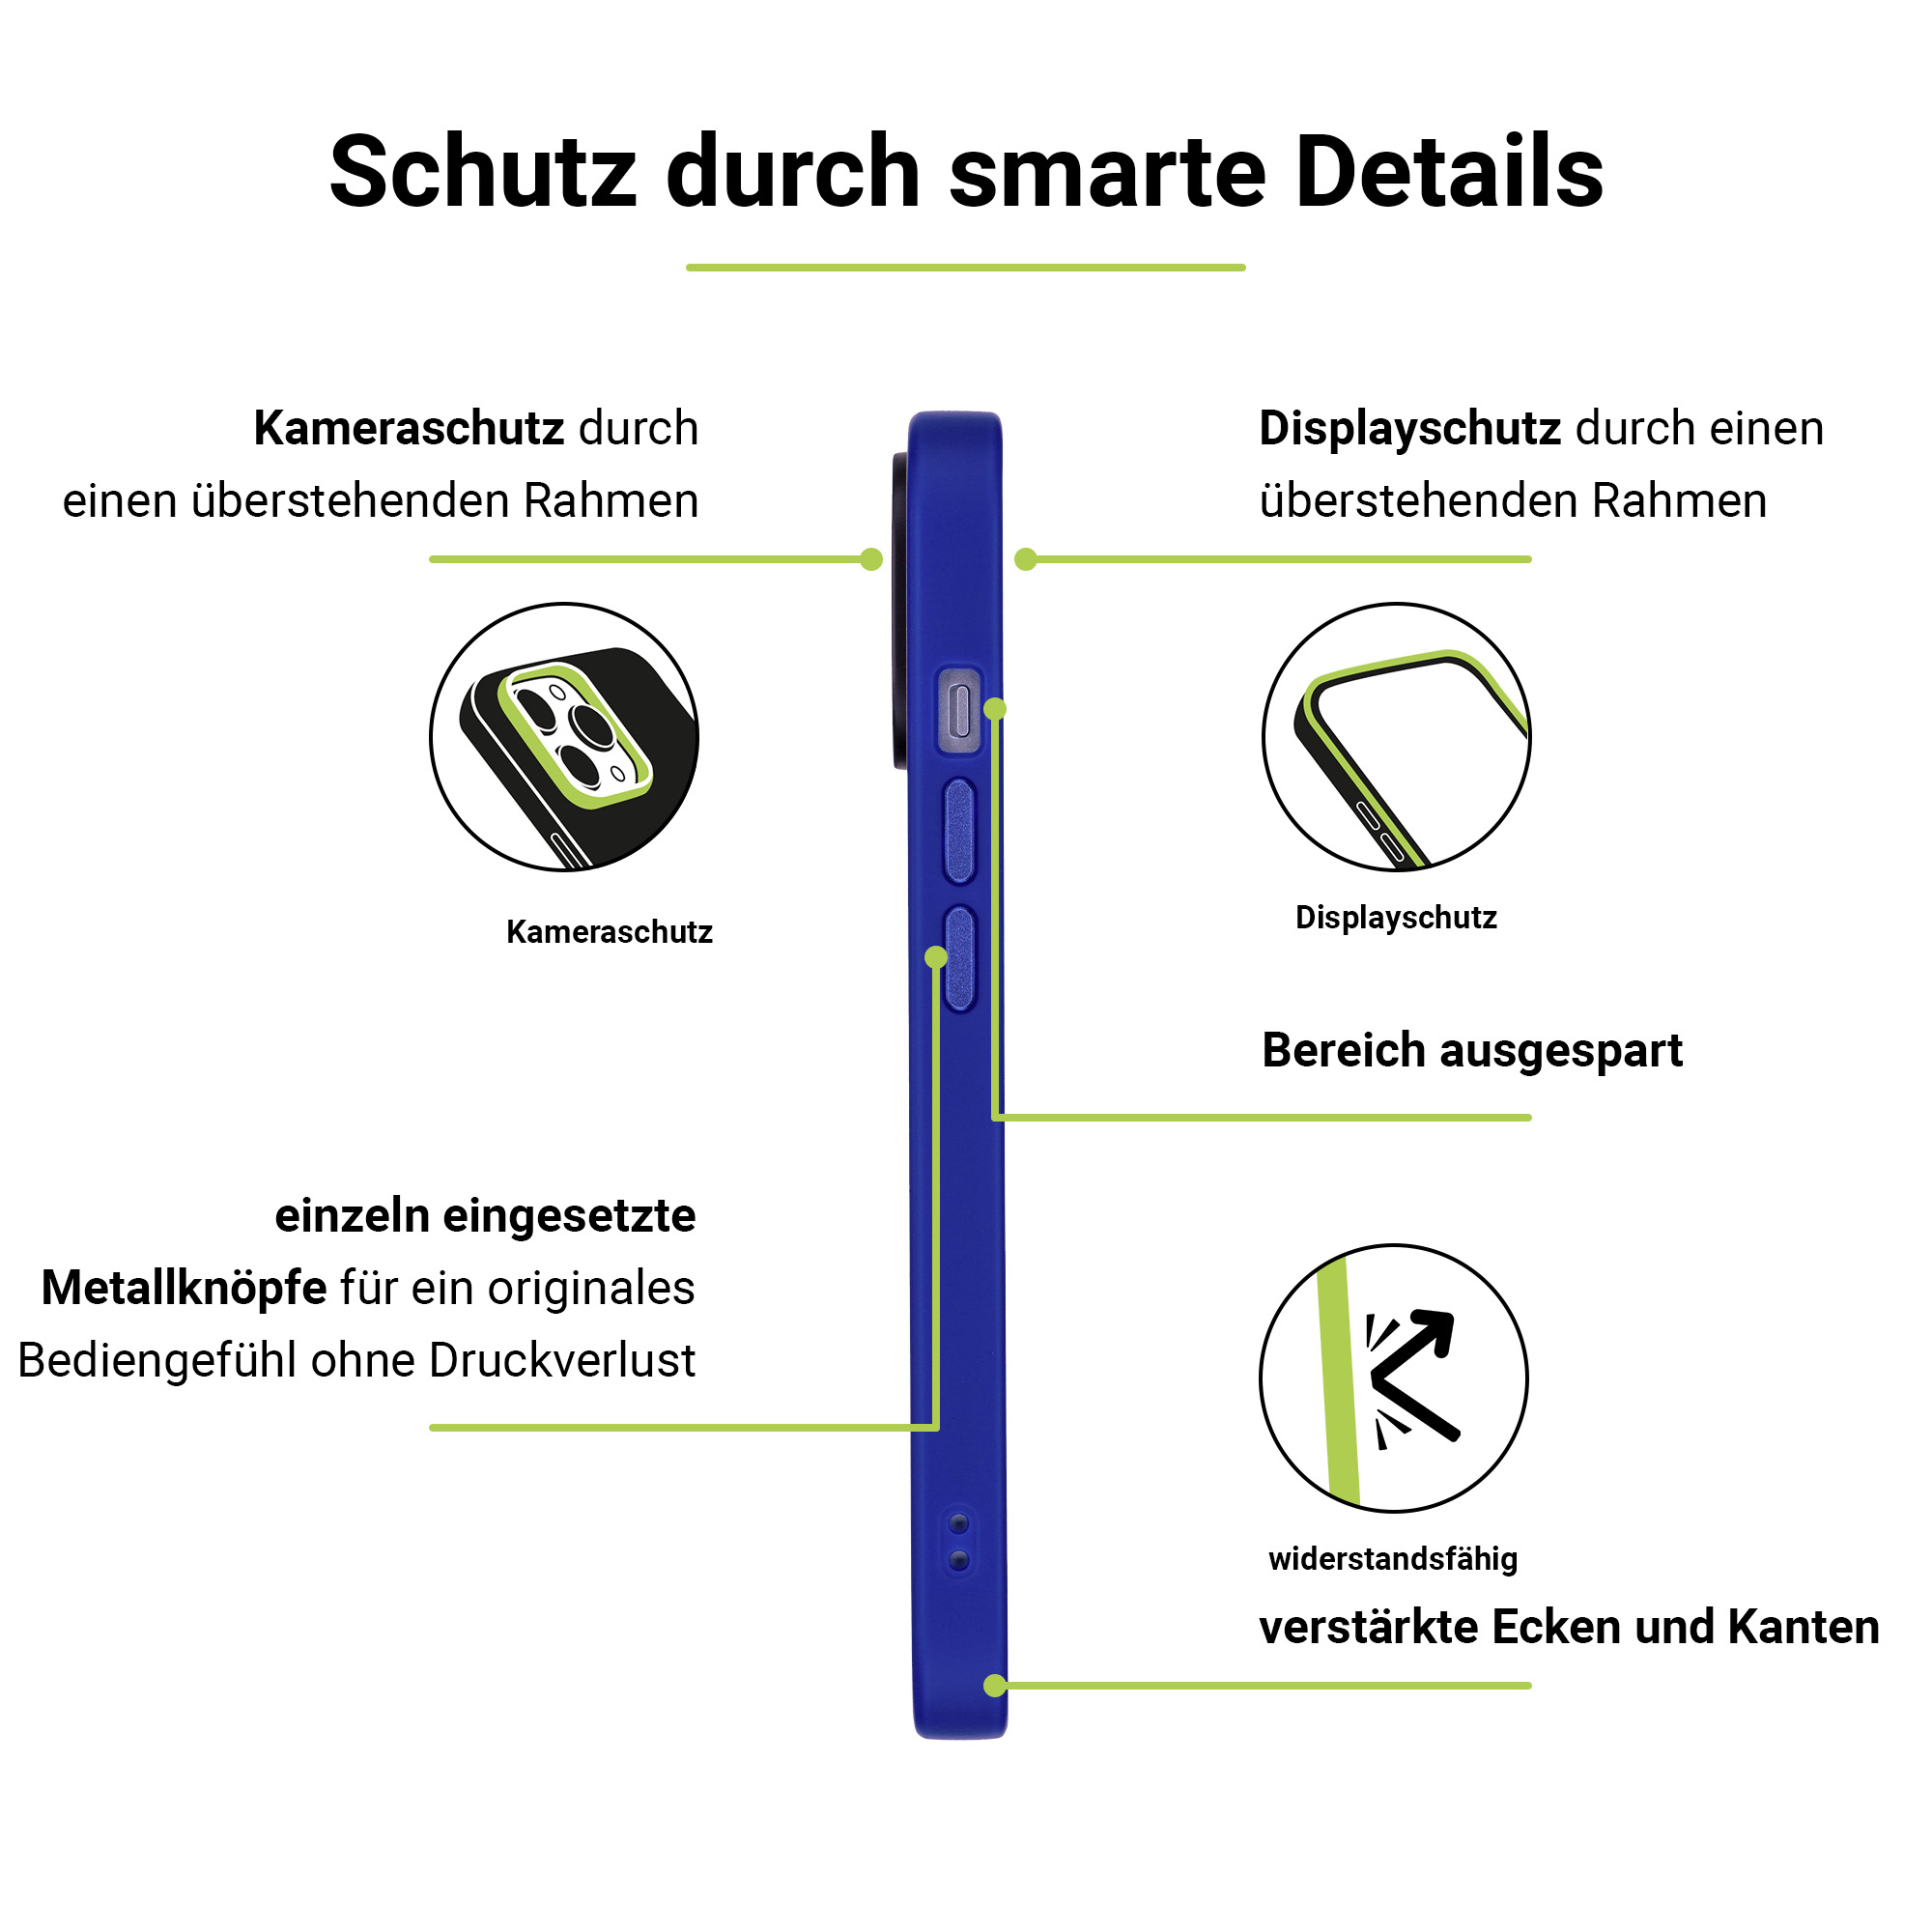 ARTWIZZ IcedClip +CHARGE, Backcover, Apple, iPhone Blau 15